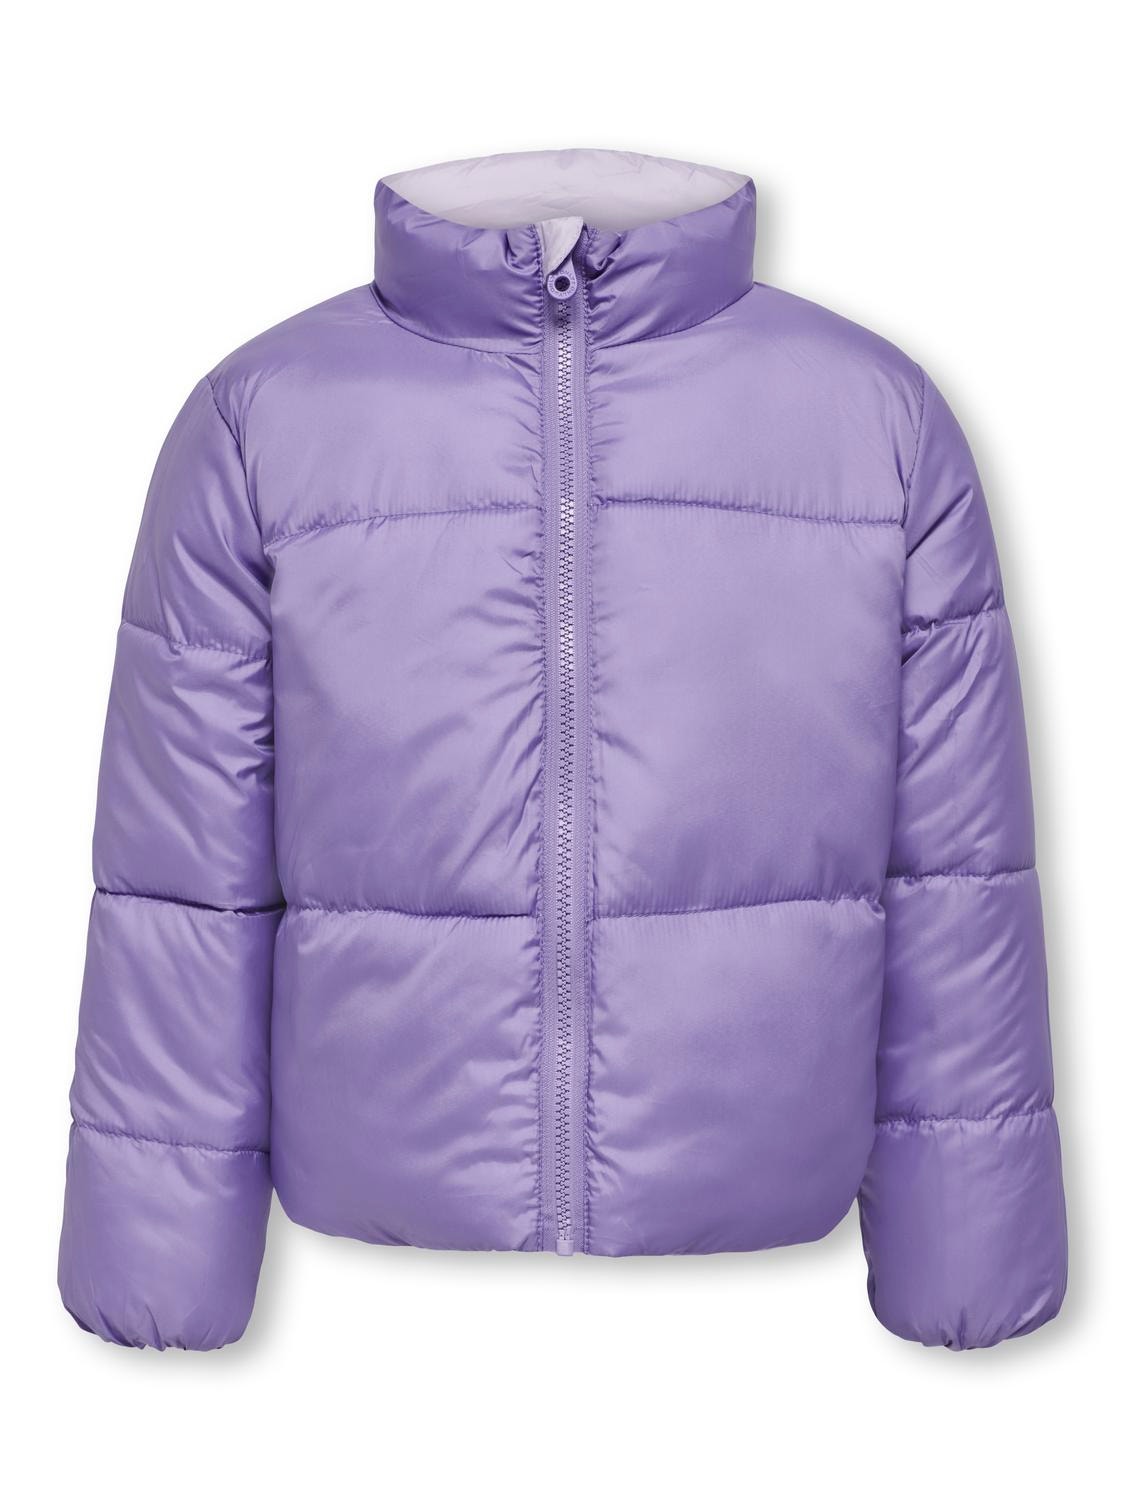 ONLY Reversible puffer jacket -Pastel Lilac - 15296063